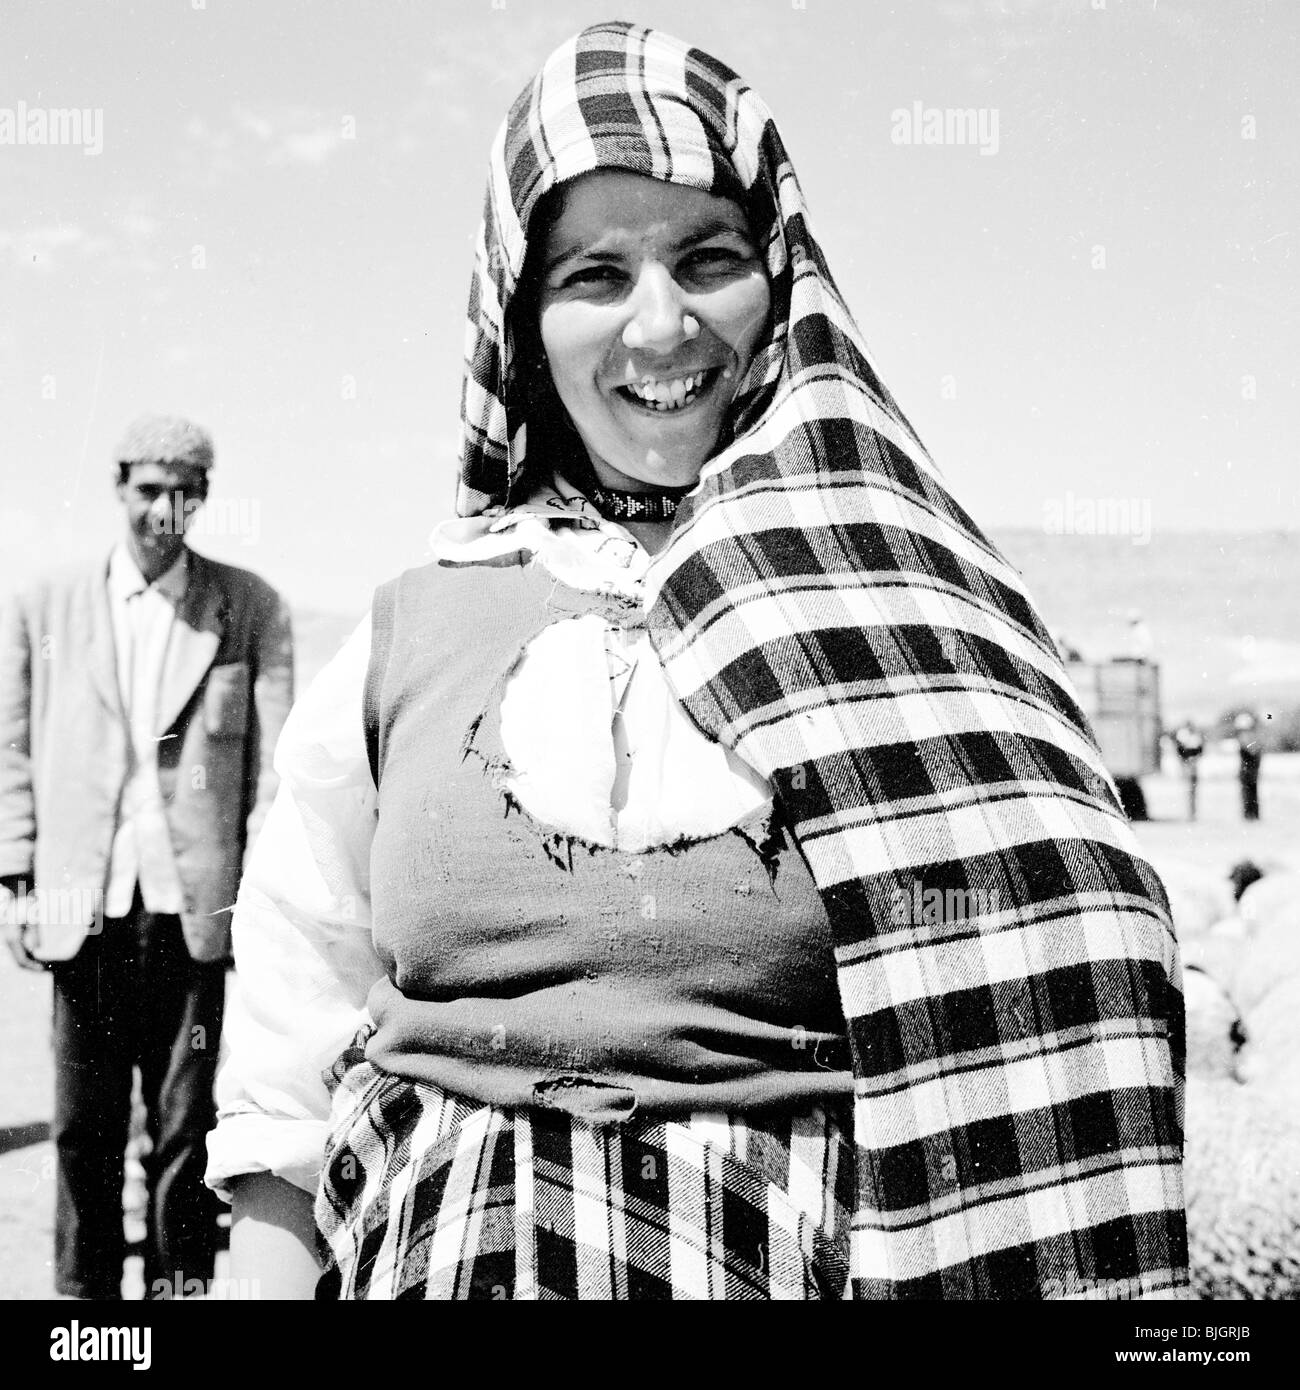 A portrait of local woman, a Maghrebi, wearing traditional headdress, Morocco, 1950s by J.Allan Cash. Stock Photo